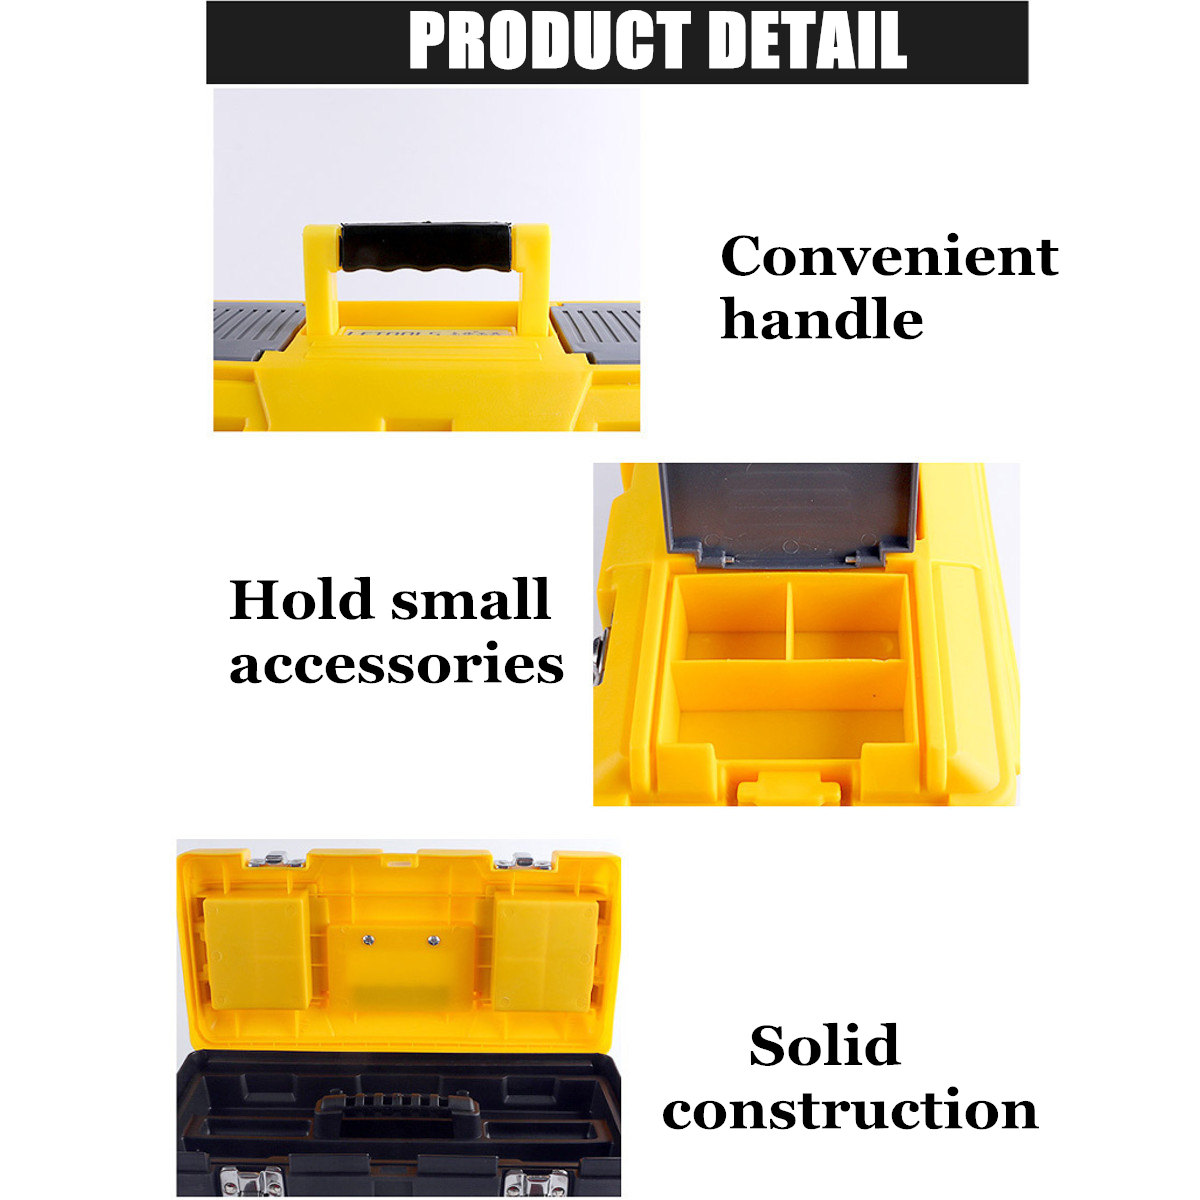 141719-Inch-Plastic-Work-Tools-Storage-Box-Protable-Carrying-Case-Handle-Accessories-Holder-1321332-4